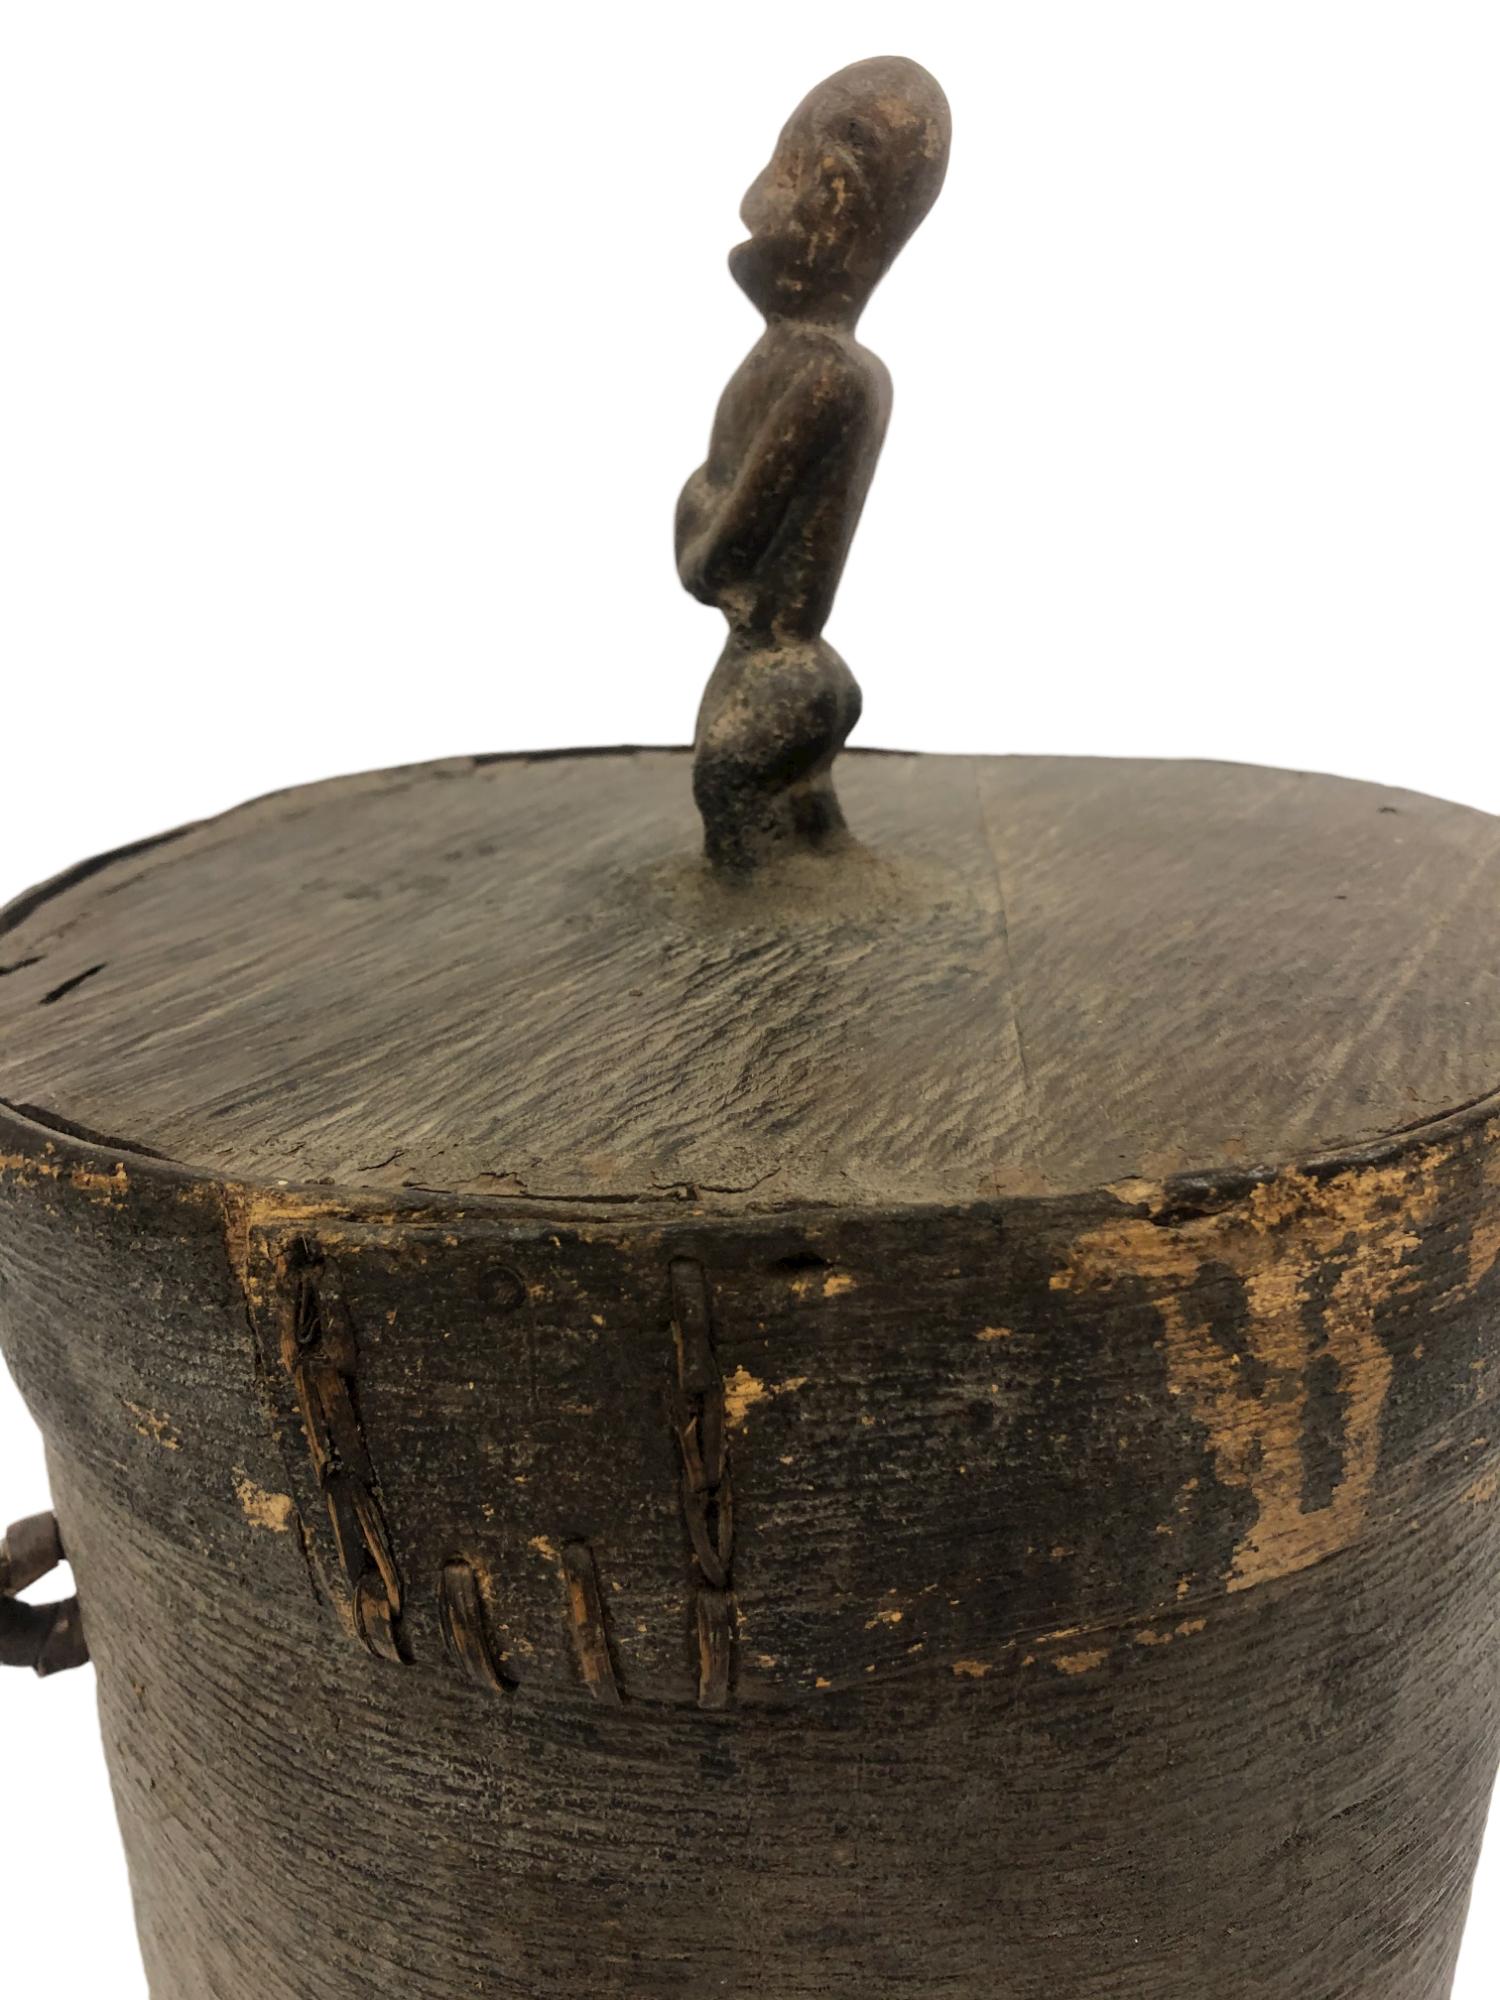 African bentwood canister with carved wood figurine with exquisite hand stitching. 

Property from esteemed interior designer Juan Montoya. Juan Montoya is one of the most acclaimed and prolific interior designers in the world today. Juan Montoya